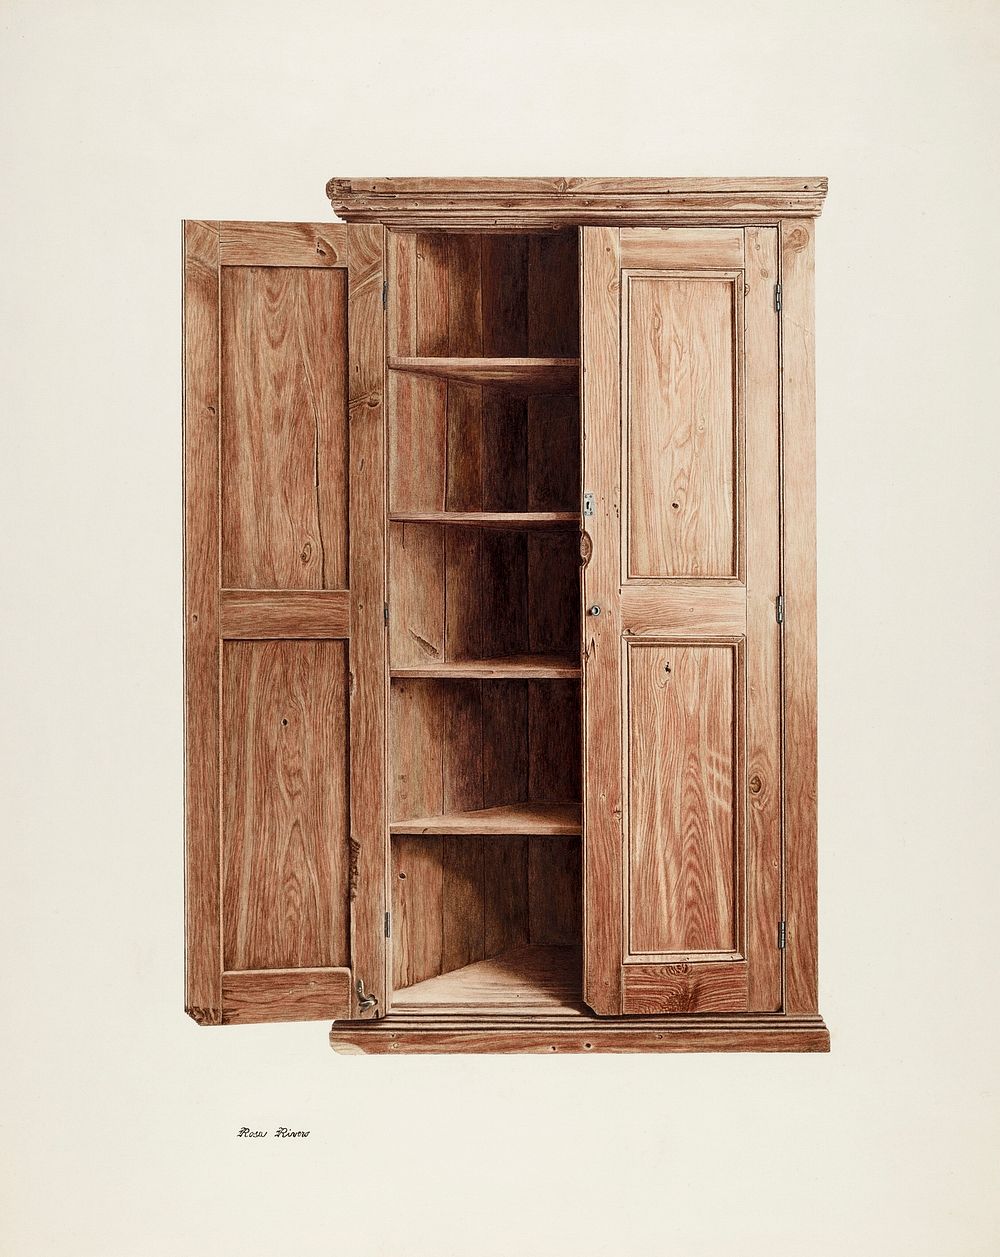 Triangular Corner Safe (c. 1941) by Rosa Rivero. Original from The National Gallery of Art. Digitally enhanced by rawpixel.